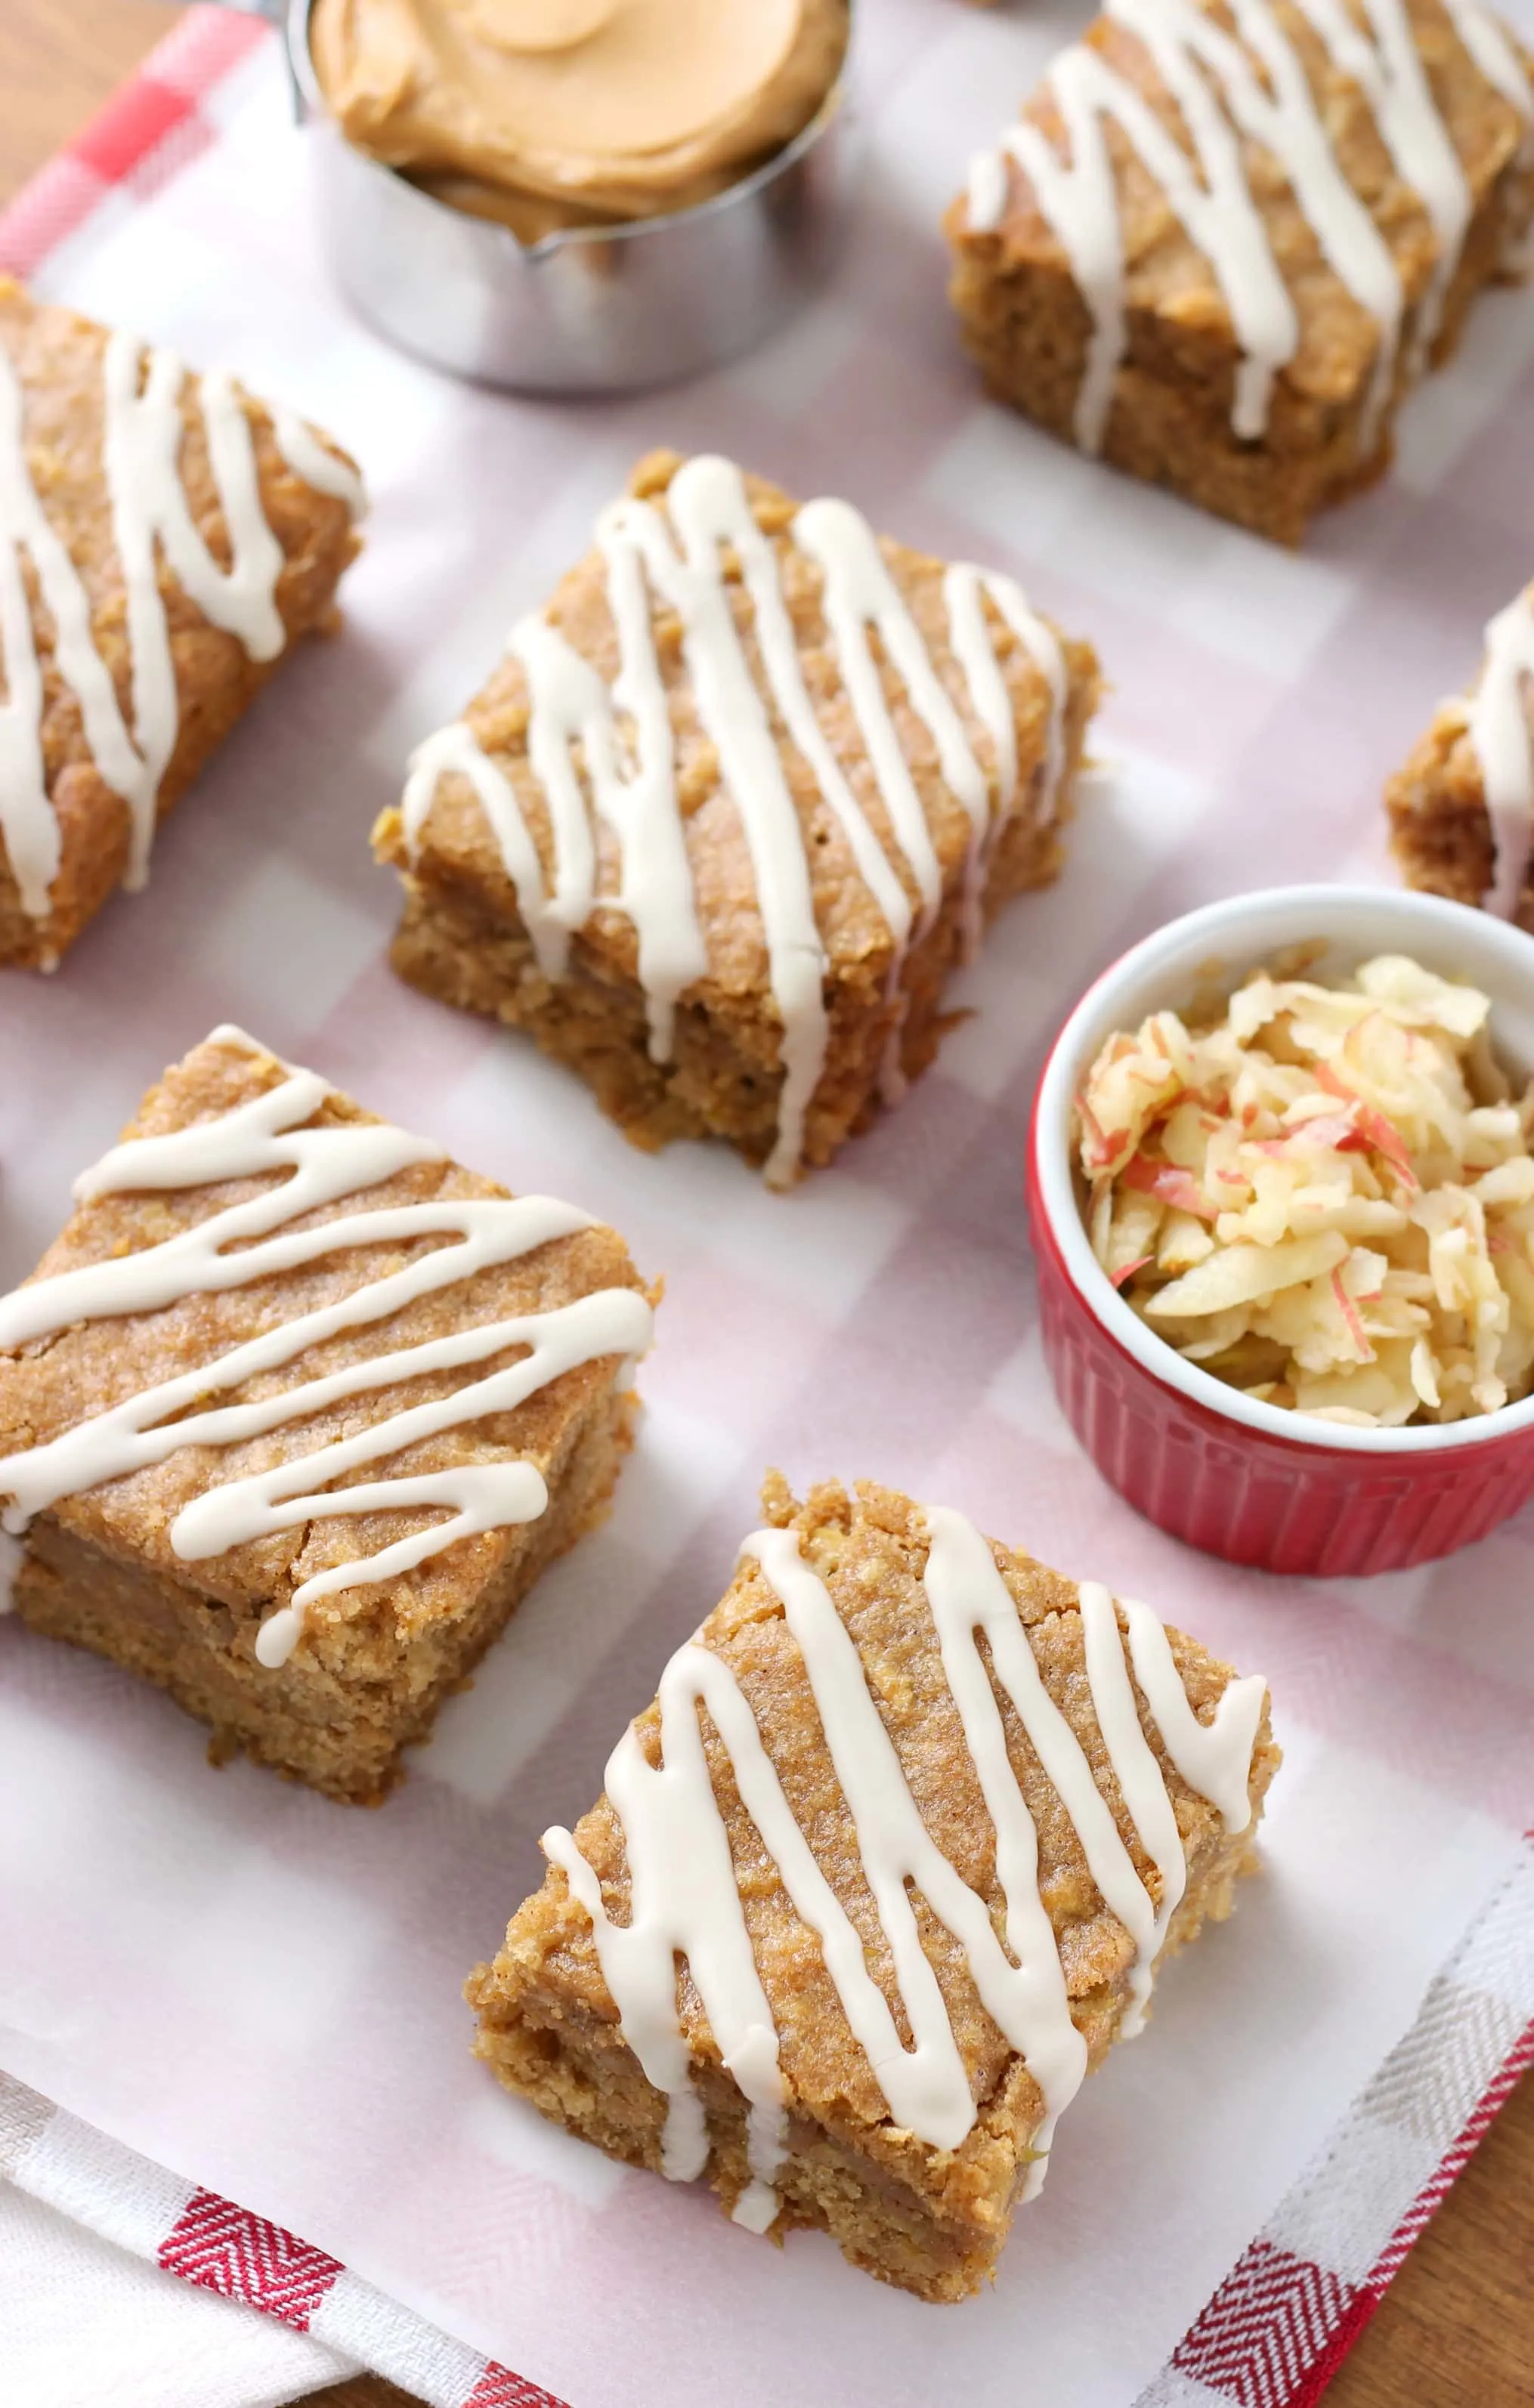 Whole Wheat Maple Glazed Apple Peanut Butter Bars Recipe from A Kitchen Addiction